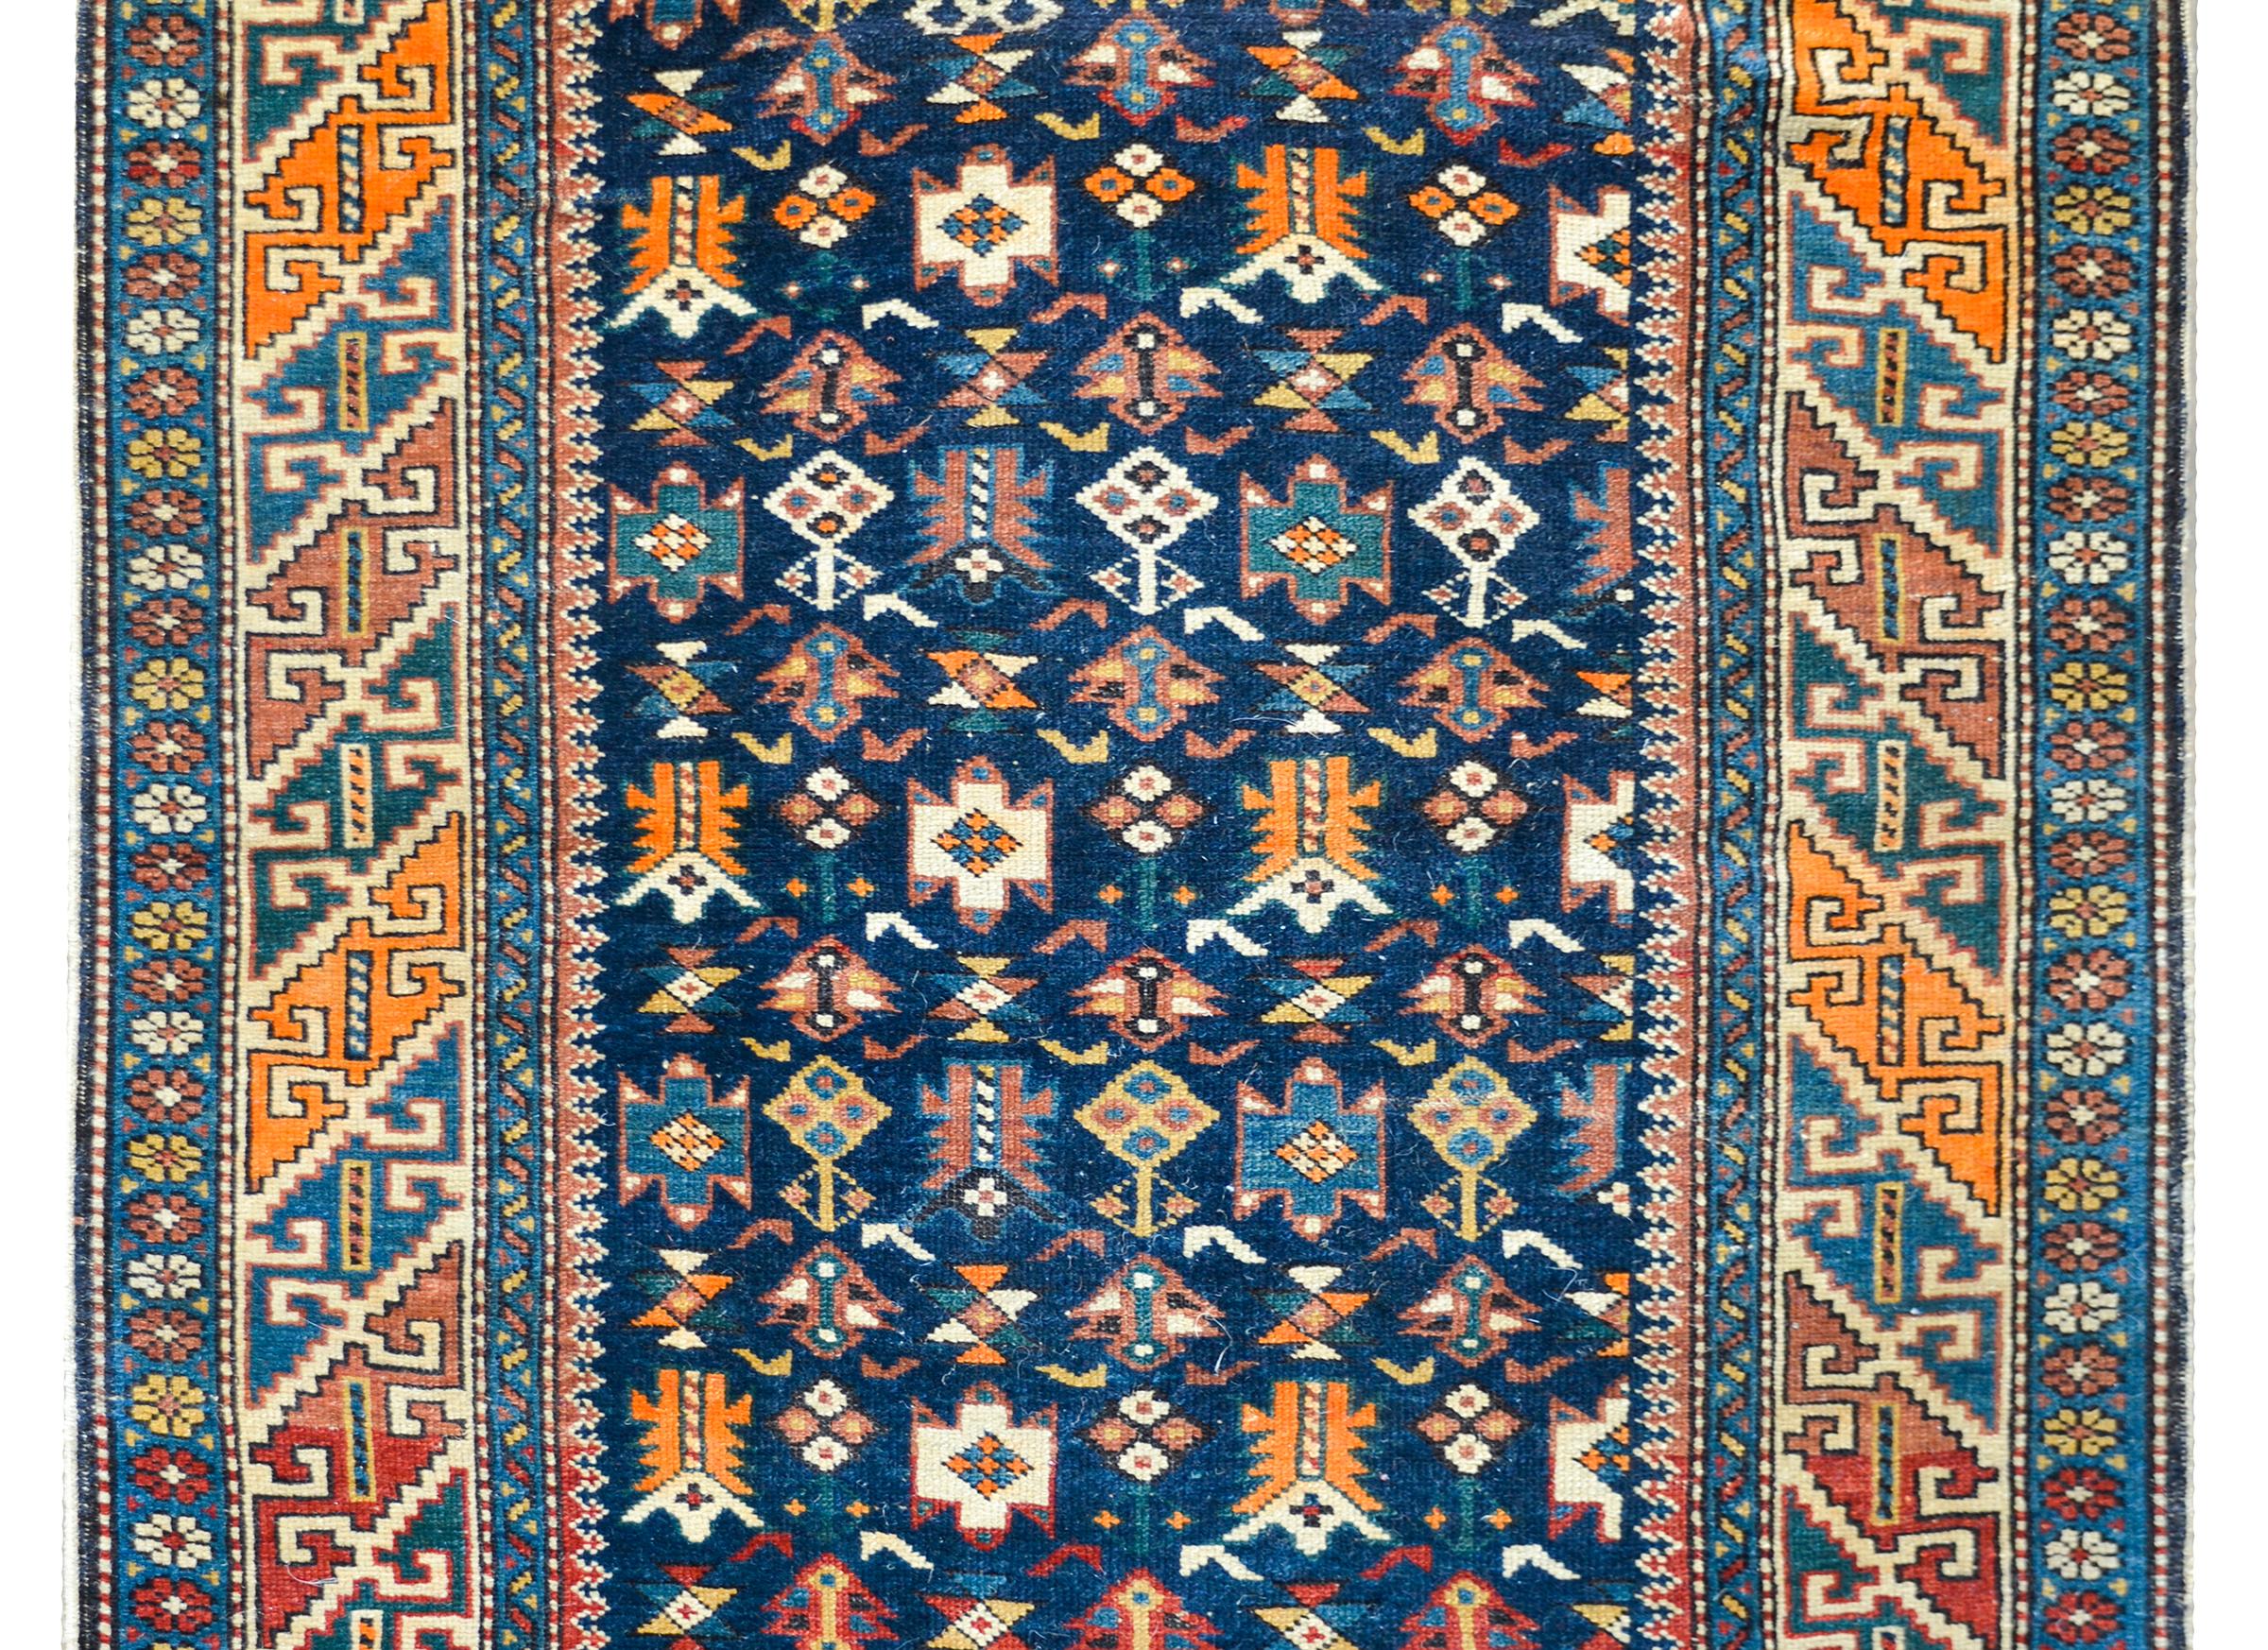 A early 20th century Persian Perepedil rug with a beautiful all-over field of stylized flowers woven in crimson, orange, white, and gold against a dark indigo background and surrounded by wonderful geometric patterned border woven in similar colors